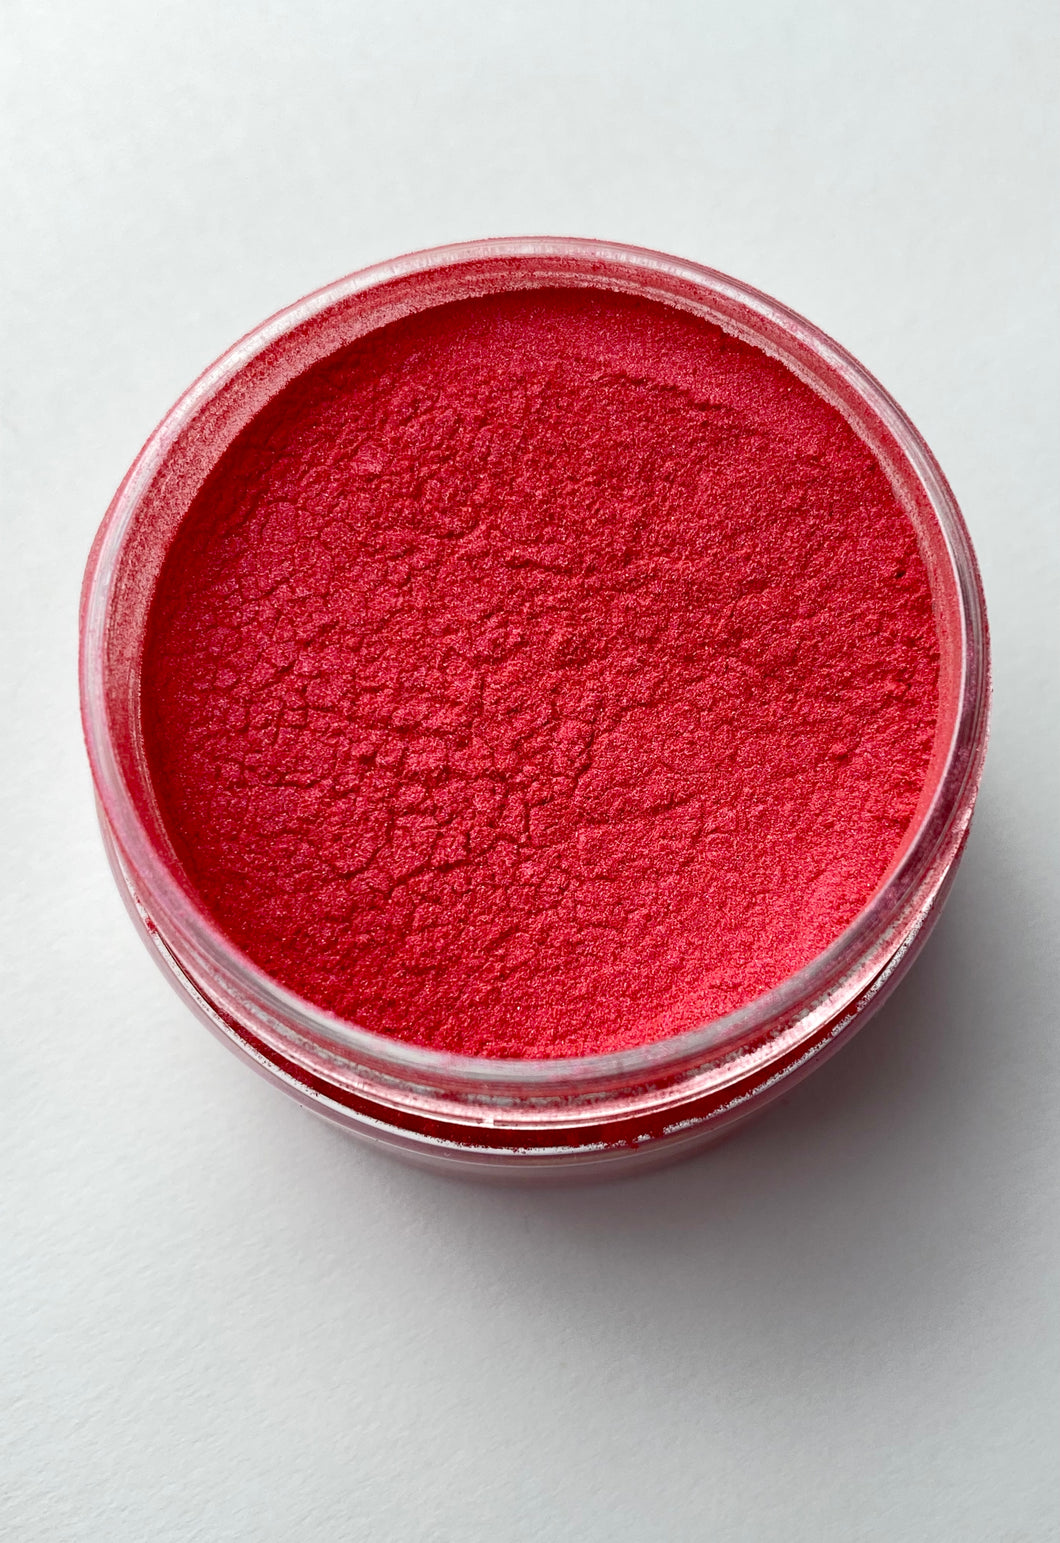 Pearlescent Mica Powder - 1 ounce jar - Hibiscus